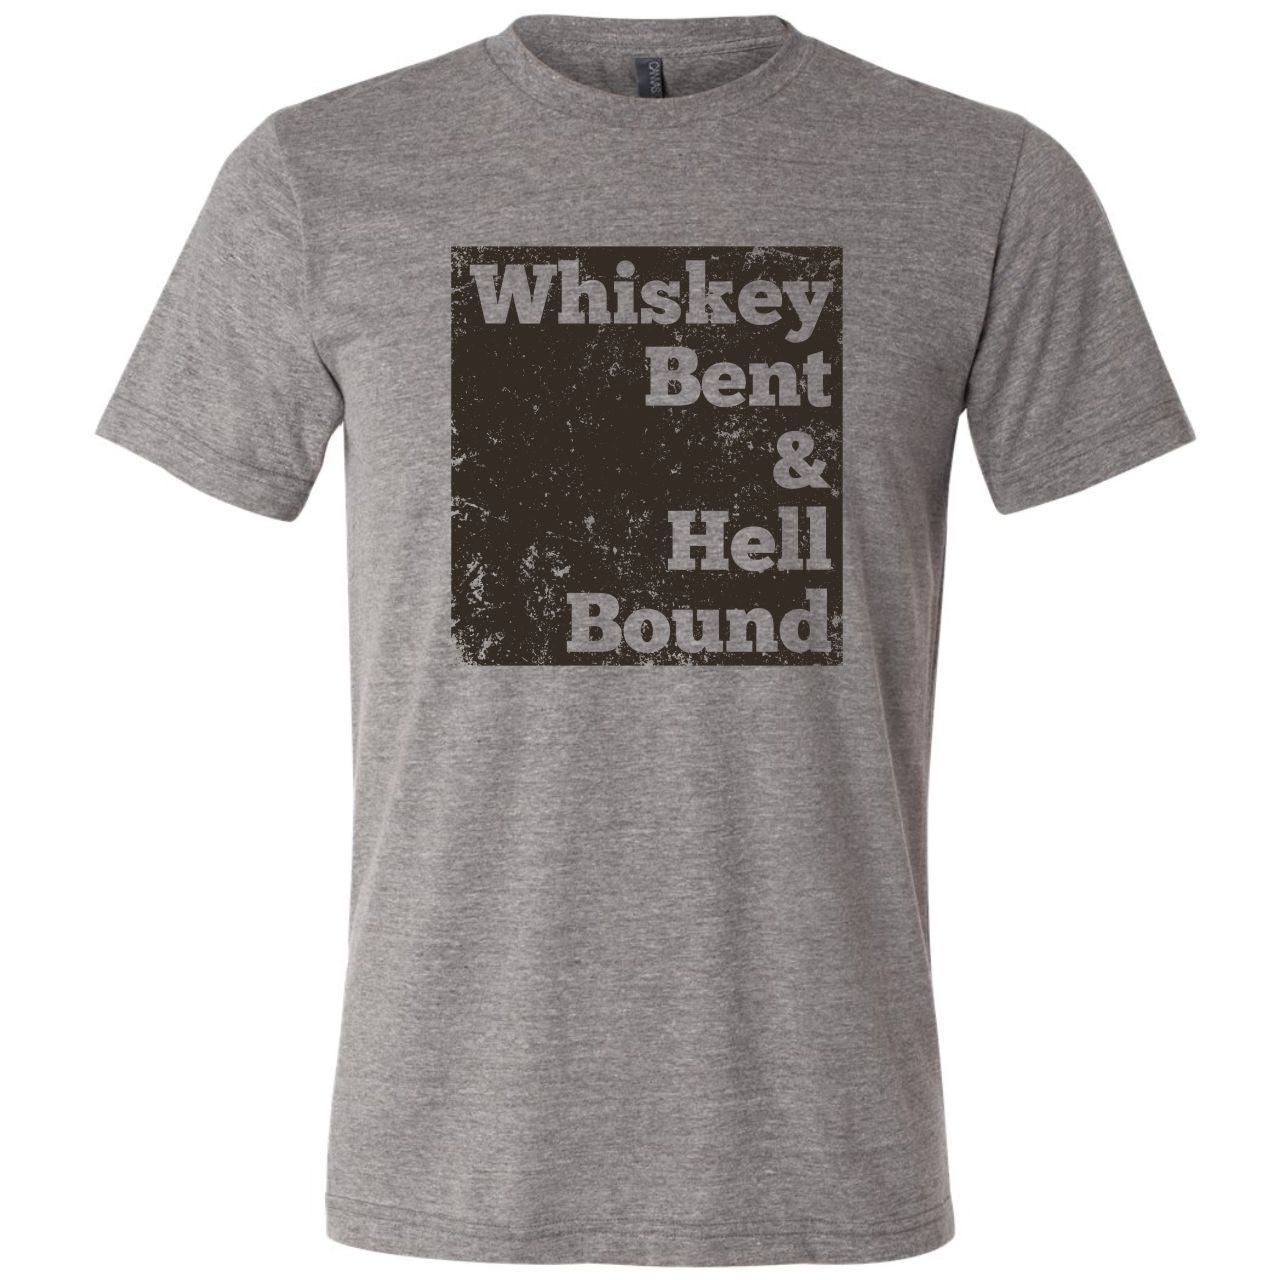 Whiskey Bent and Hell Bound - Grey Unisex Tee - The Graphic Tee